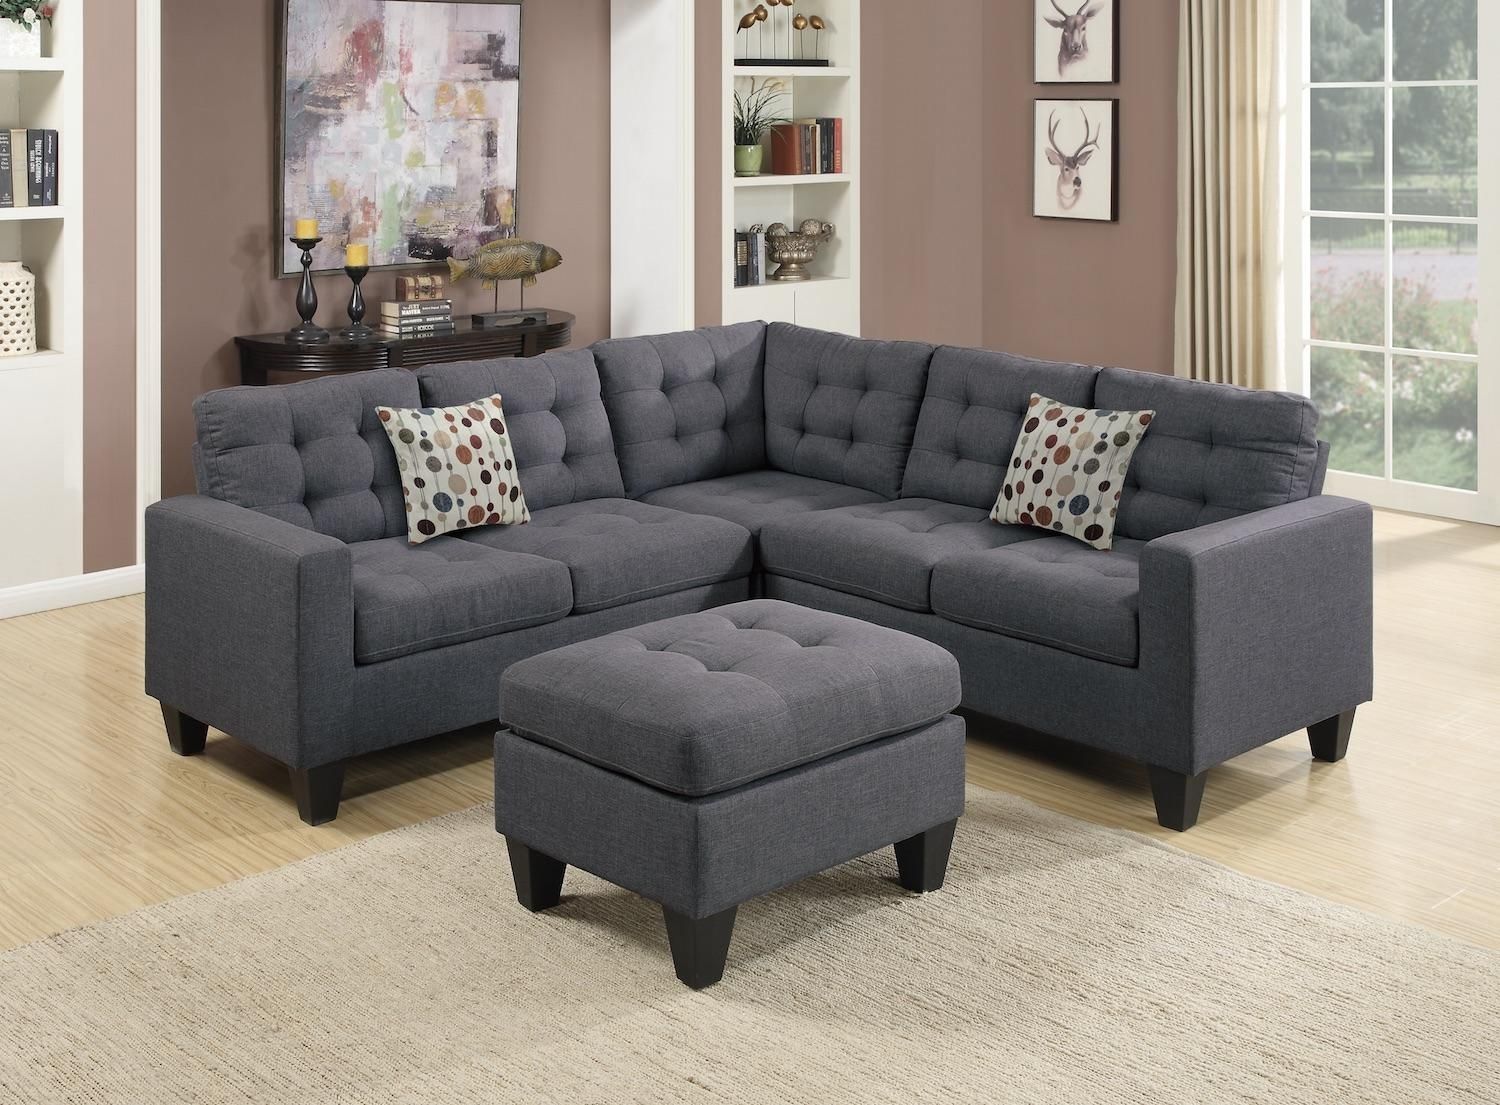 Best 10+ of Wayfair Sectional Sofas